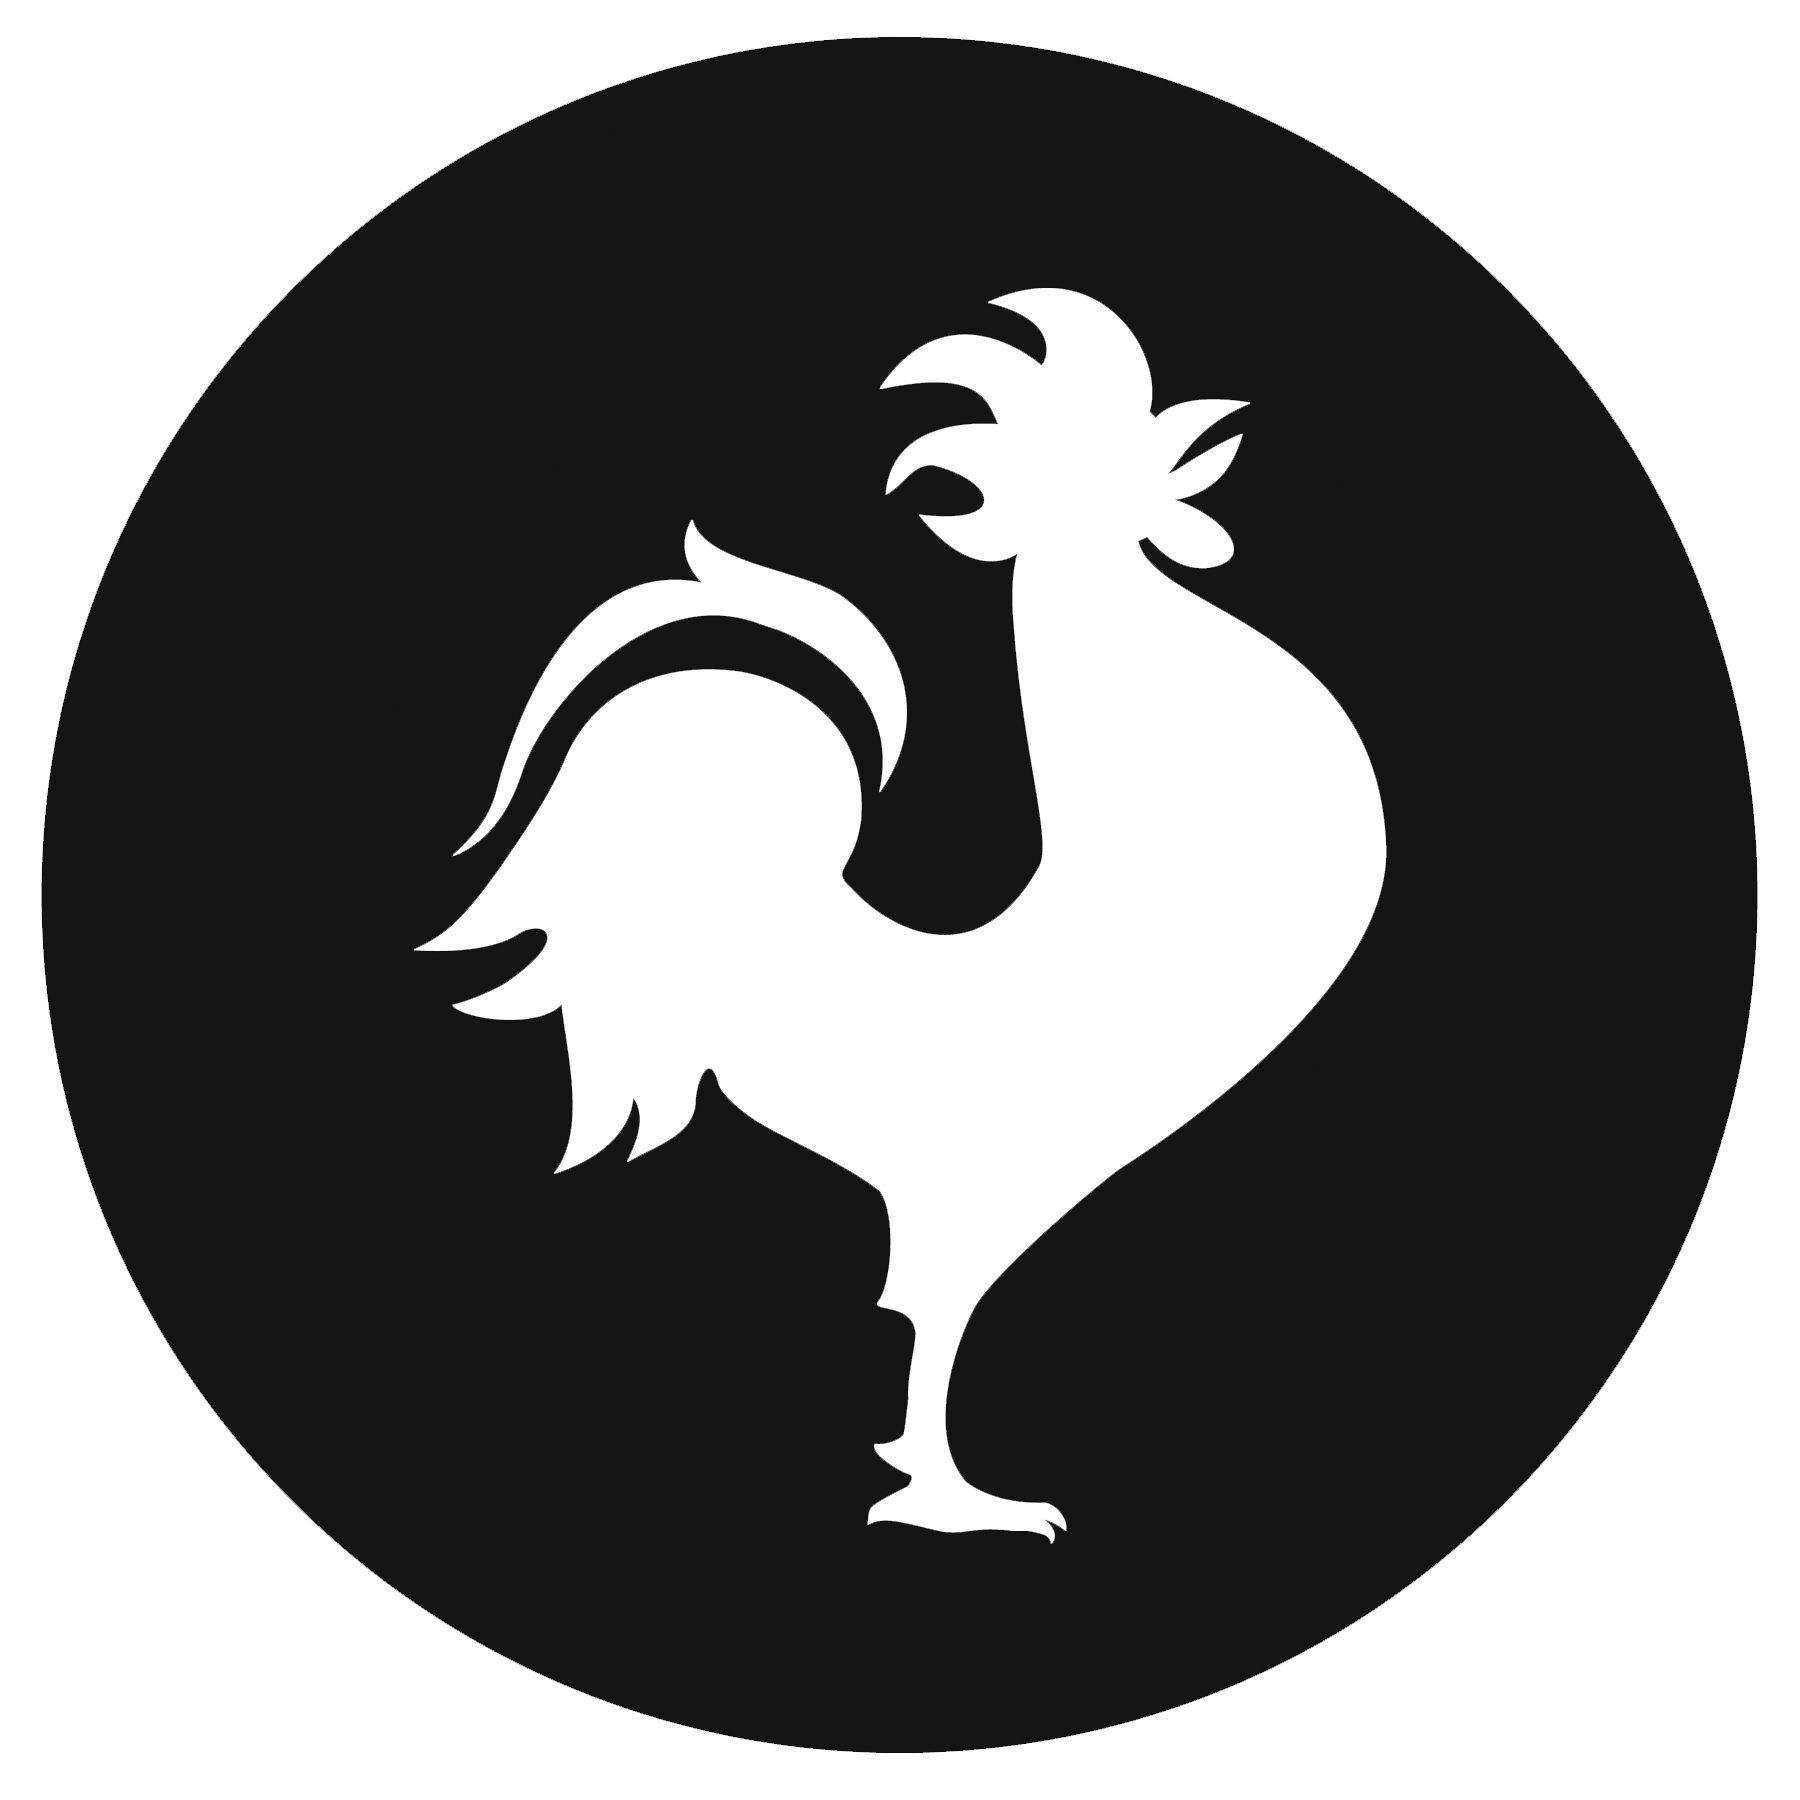 Black and White Rooster Logo - Image result for rooster logo. Logo design. Rooster logo